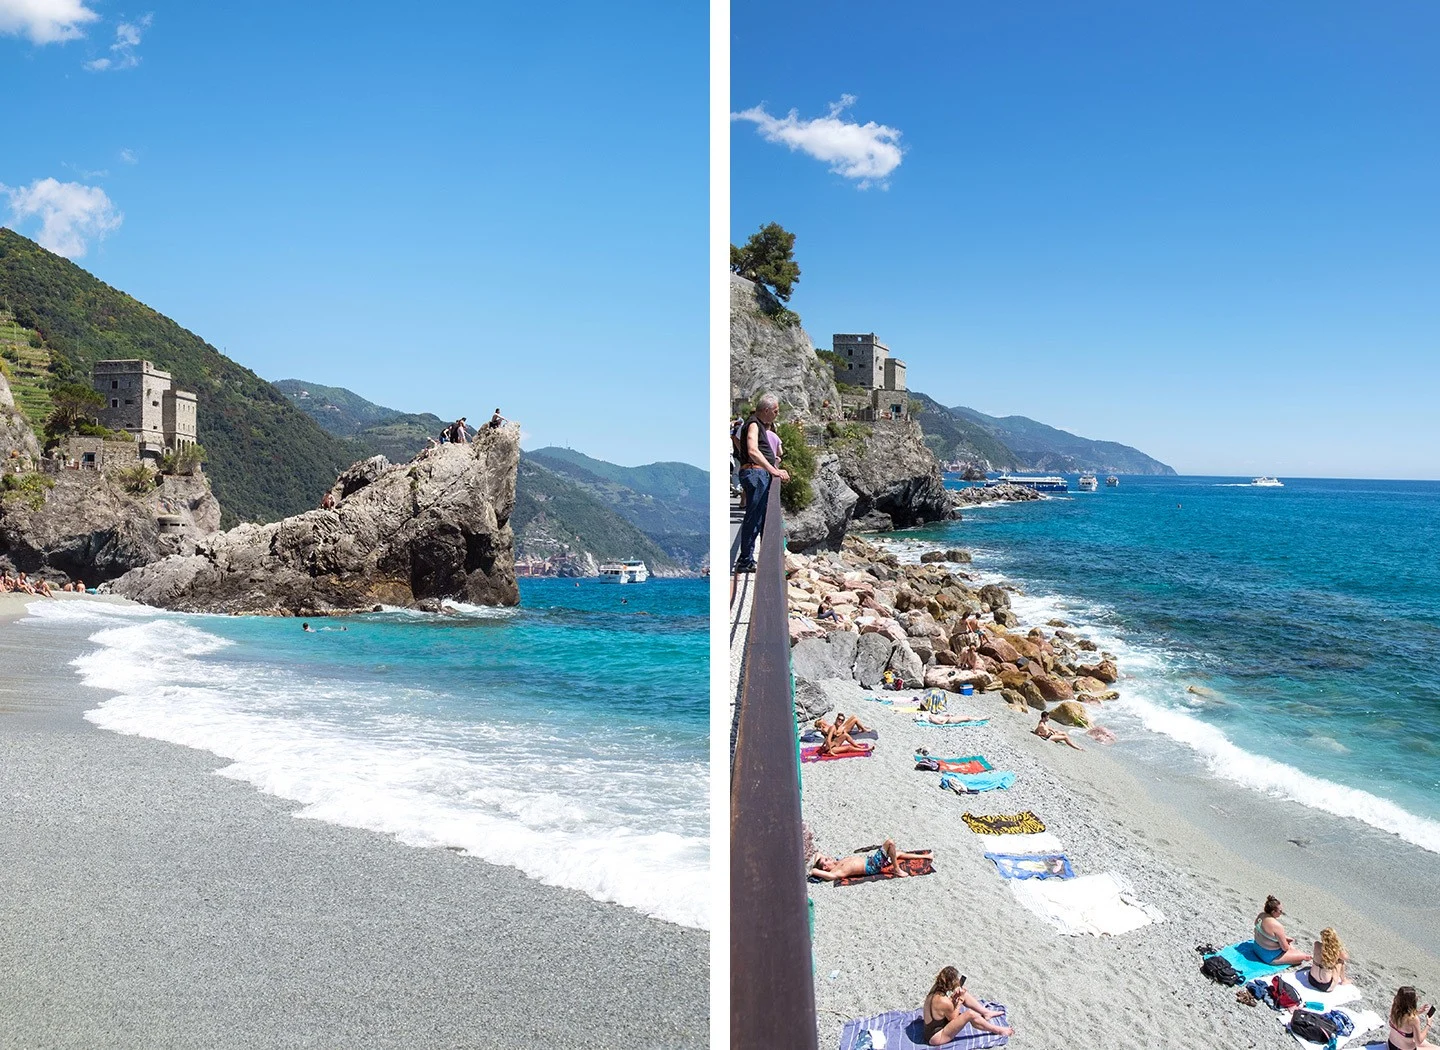 On the beach in Monterosso when visiting the Cinque Terre